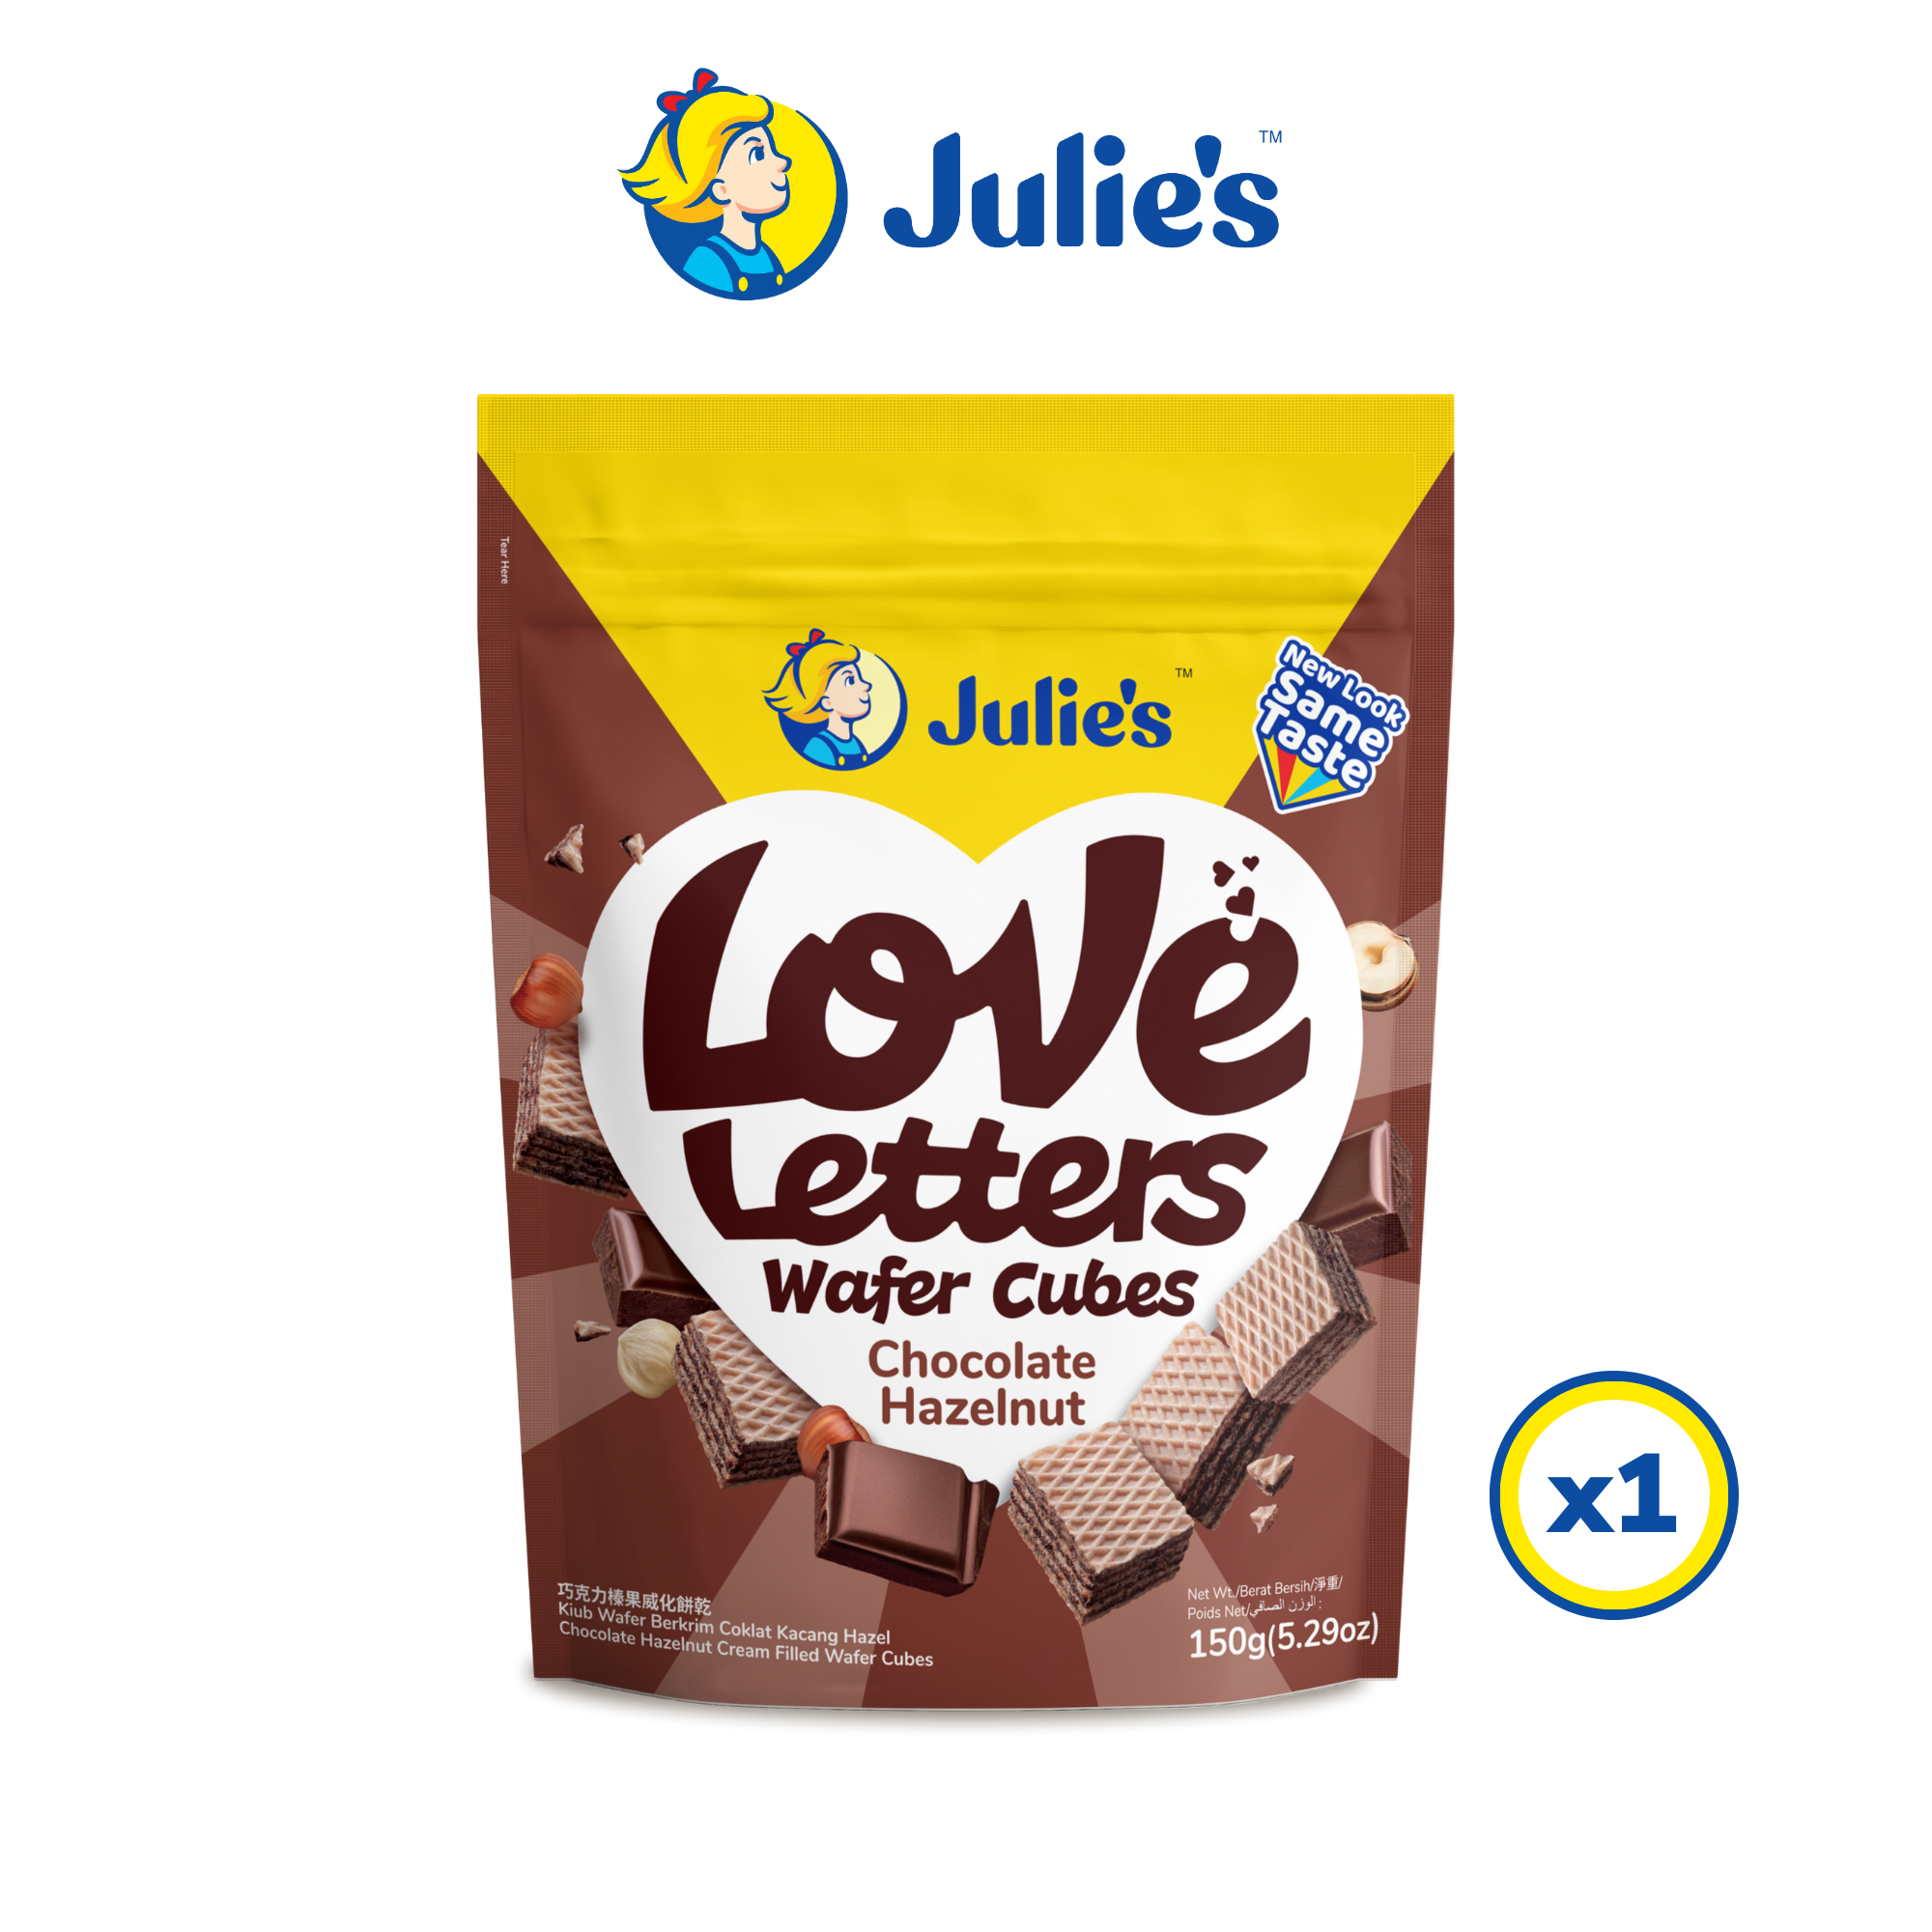 Julie's Love Letters Wafer Cubes Chocolate Hazelnut 150g x 1 pack